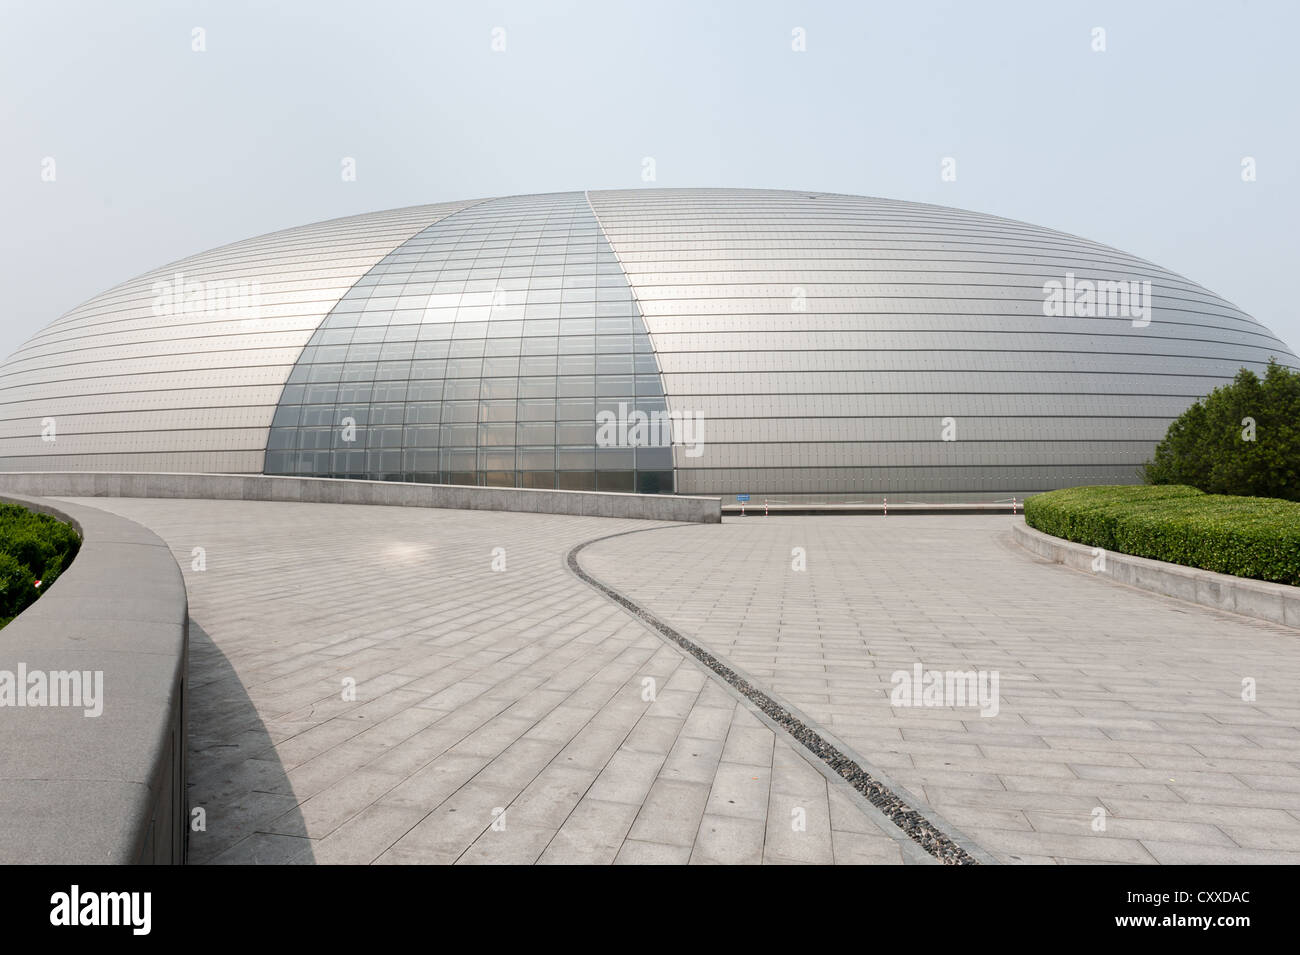 Beijing. The National Centre for the Performing Arts (NCPA), nicknamed 'The giant egg'. Stock Photo